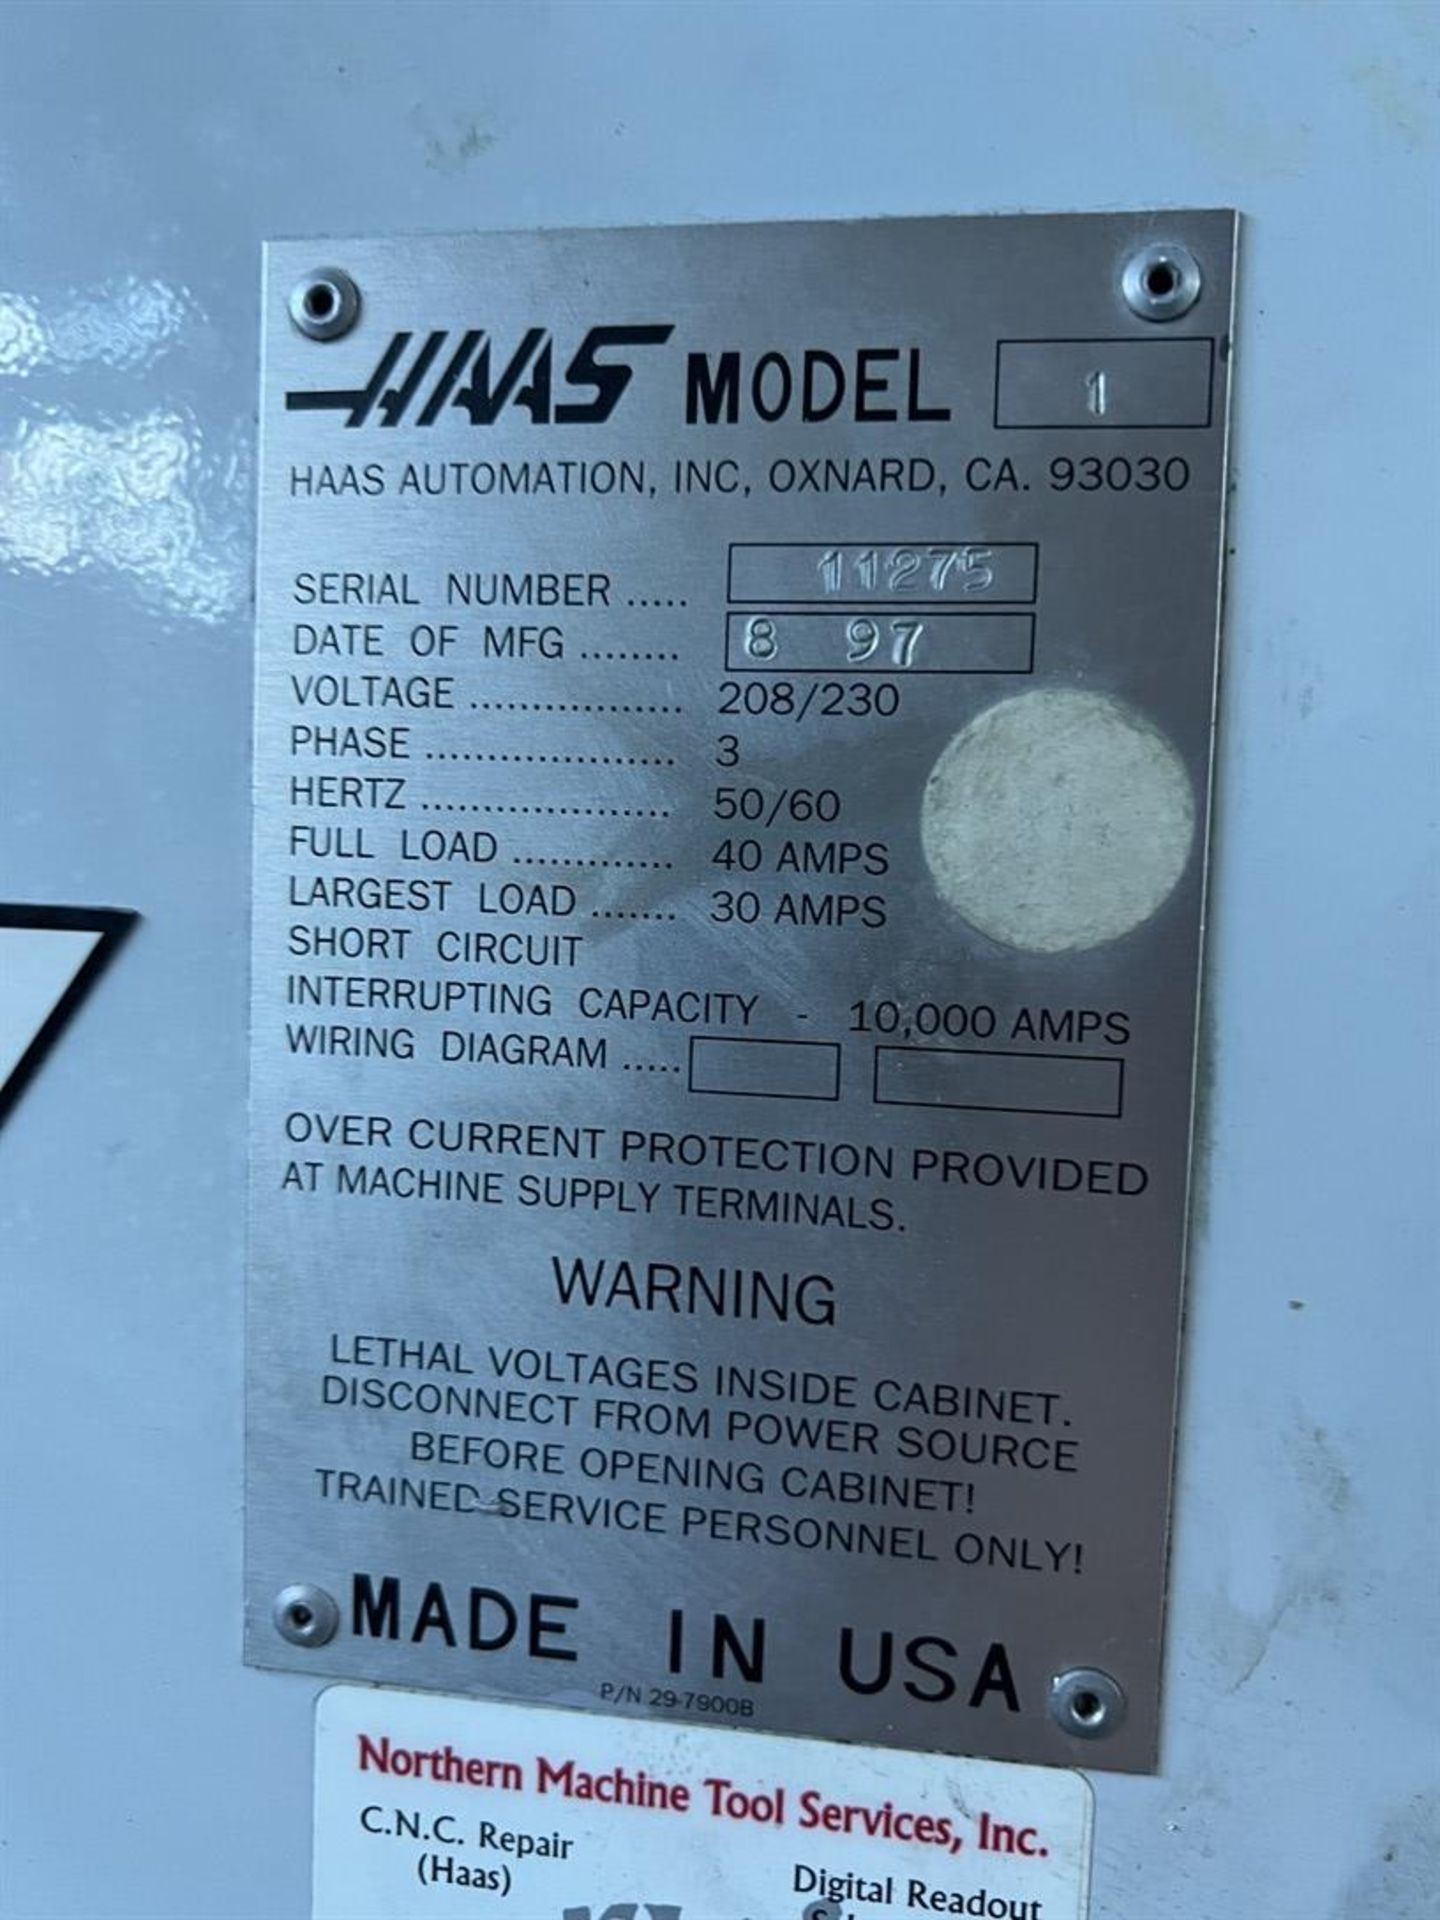 HAAS VF-1 Vertical Machining Center, s/n 11275, Haas Control, 14” x 26”, CAT 40 Spindle Taper, 20- - Image 9 of 9